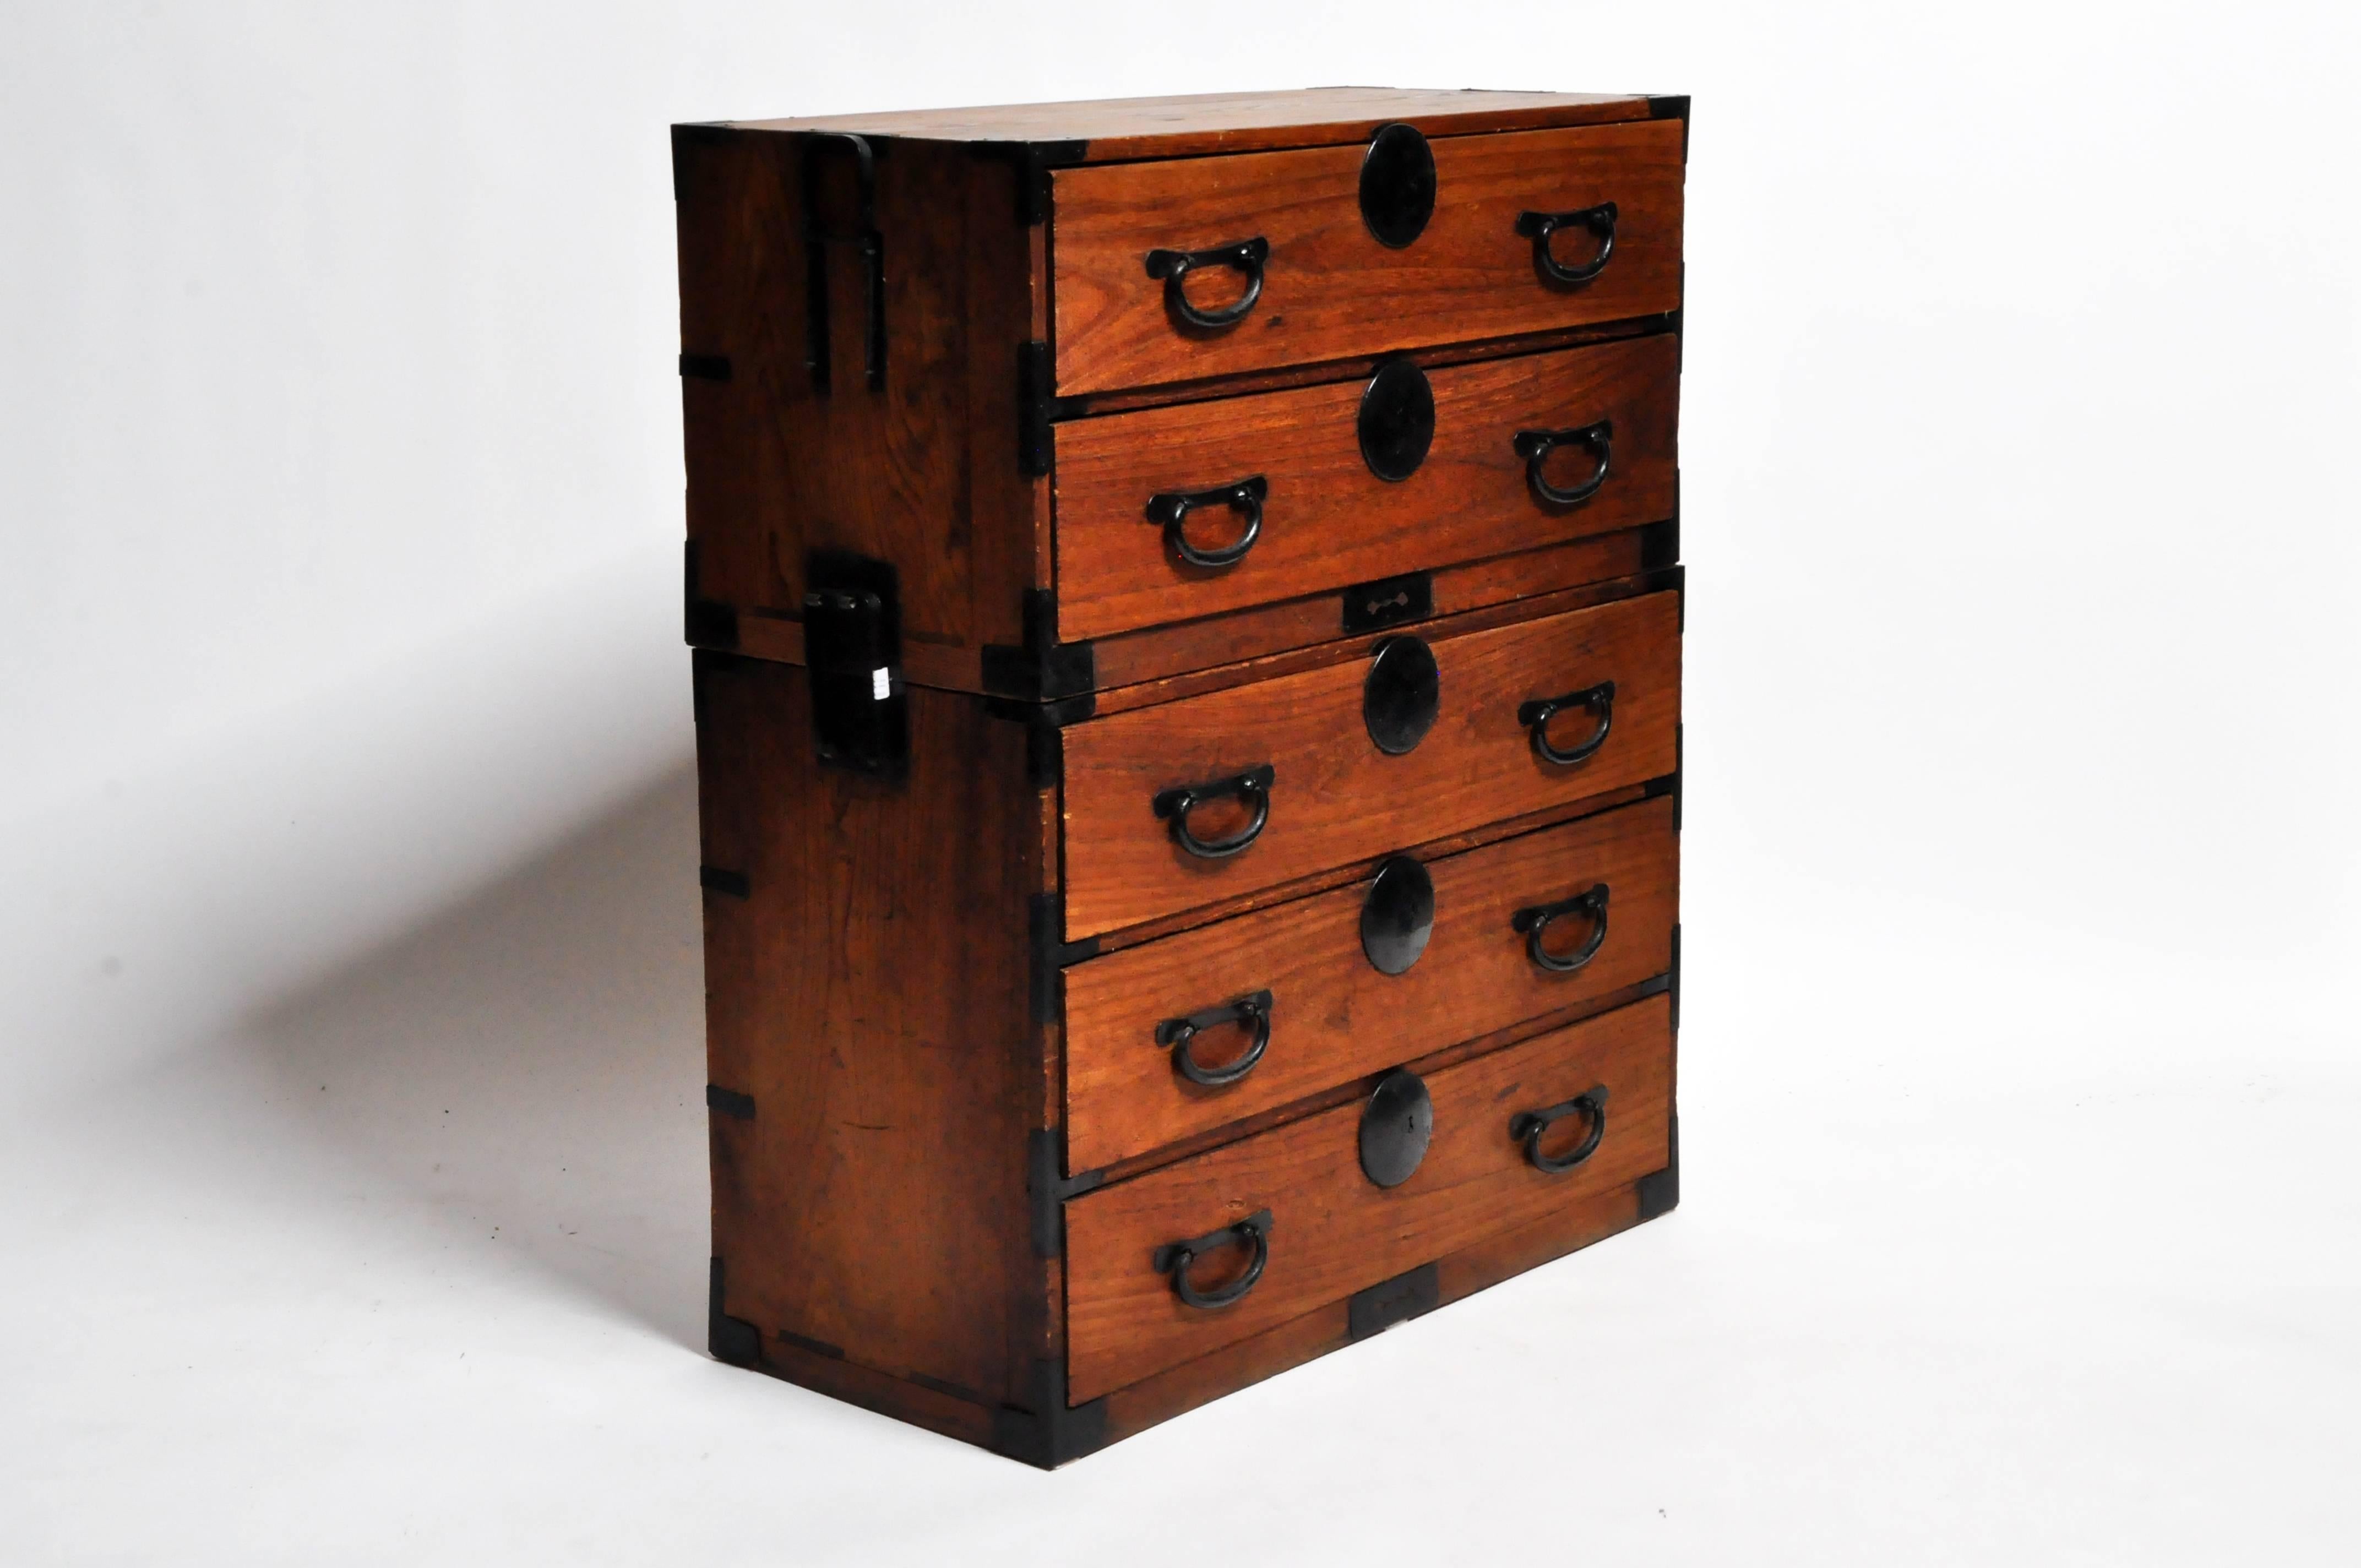 This two part Tansu chest is from Japan and was made from paulownia wood, circa 1900. The piece features five drawers and can either be stacked on top on one another or separated and used as a nightstand or side table.